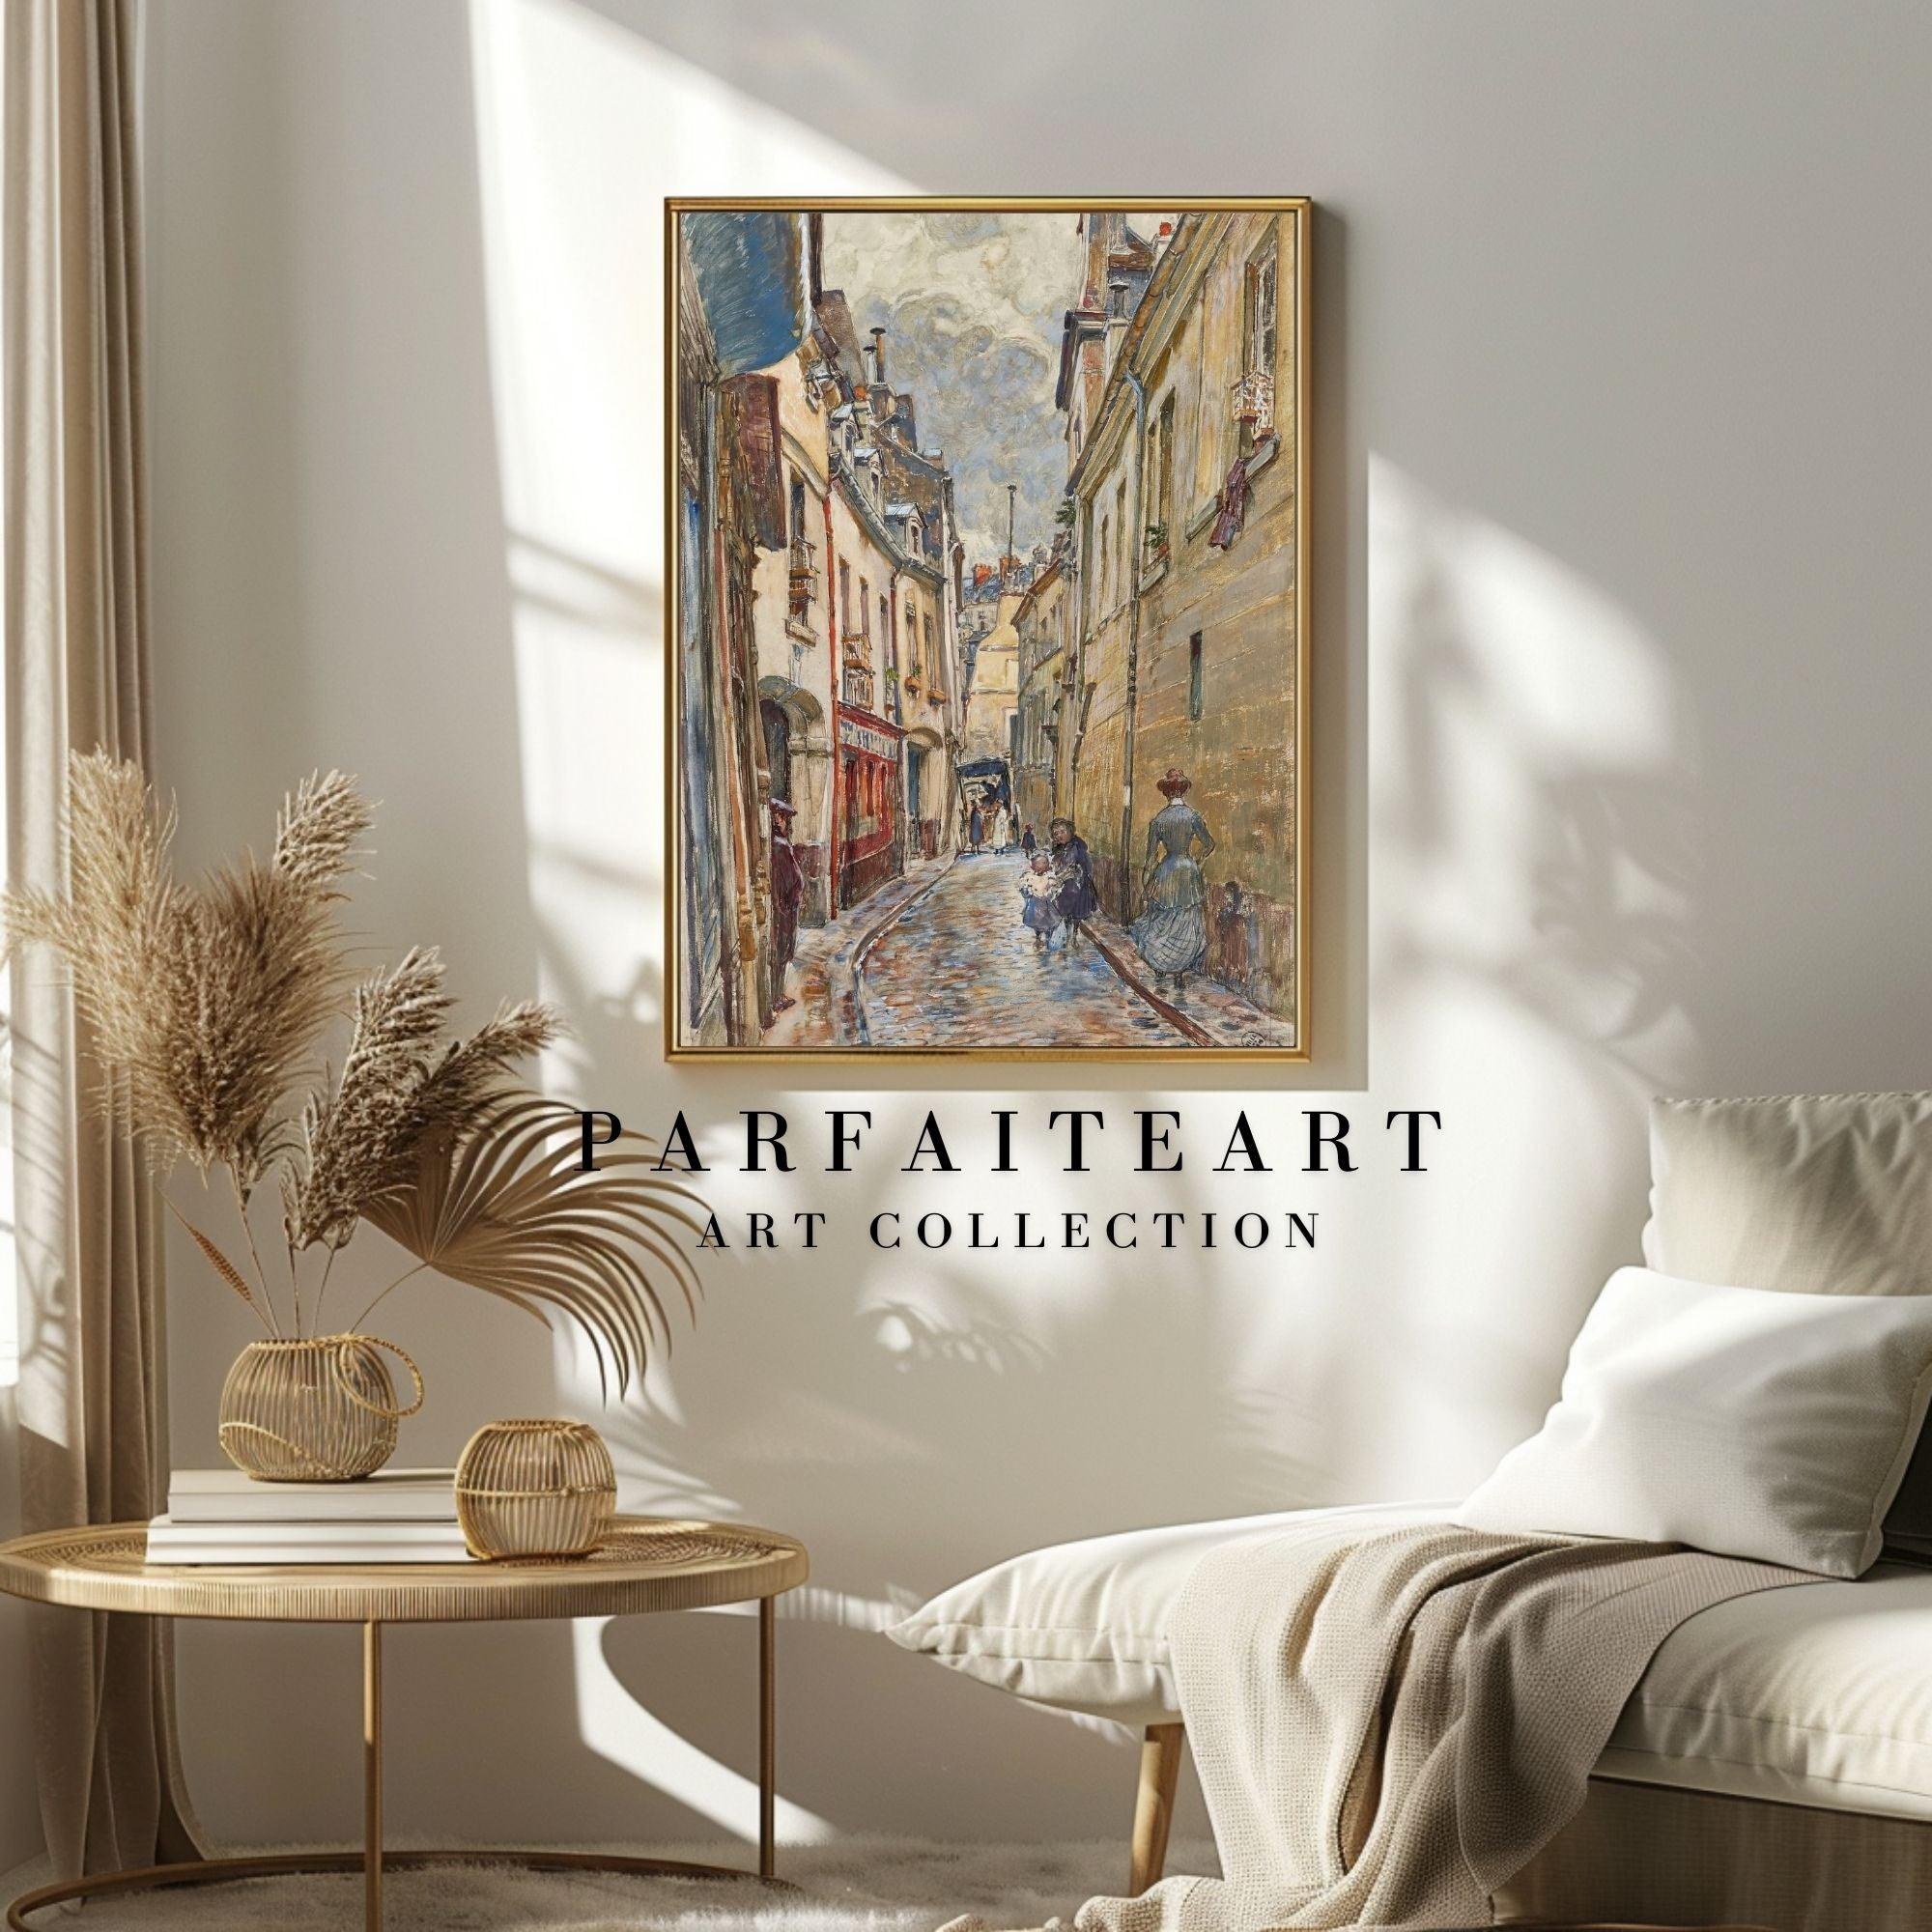 Vintage and Art Deco Wall Art Prints: Giclée-printed Realistic Artworks on Printable Canvas, Featuring Architectural Landscapes #74